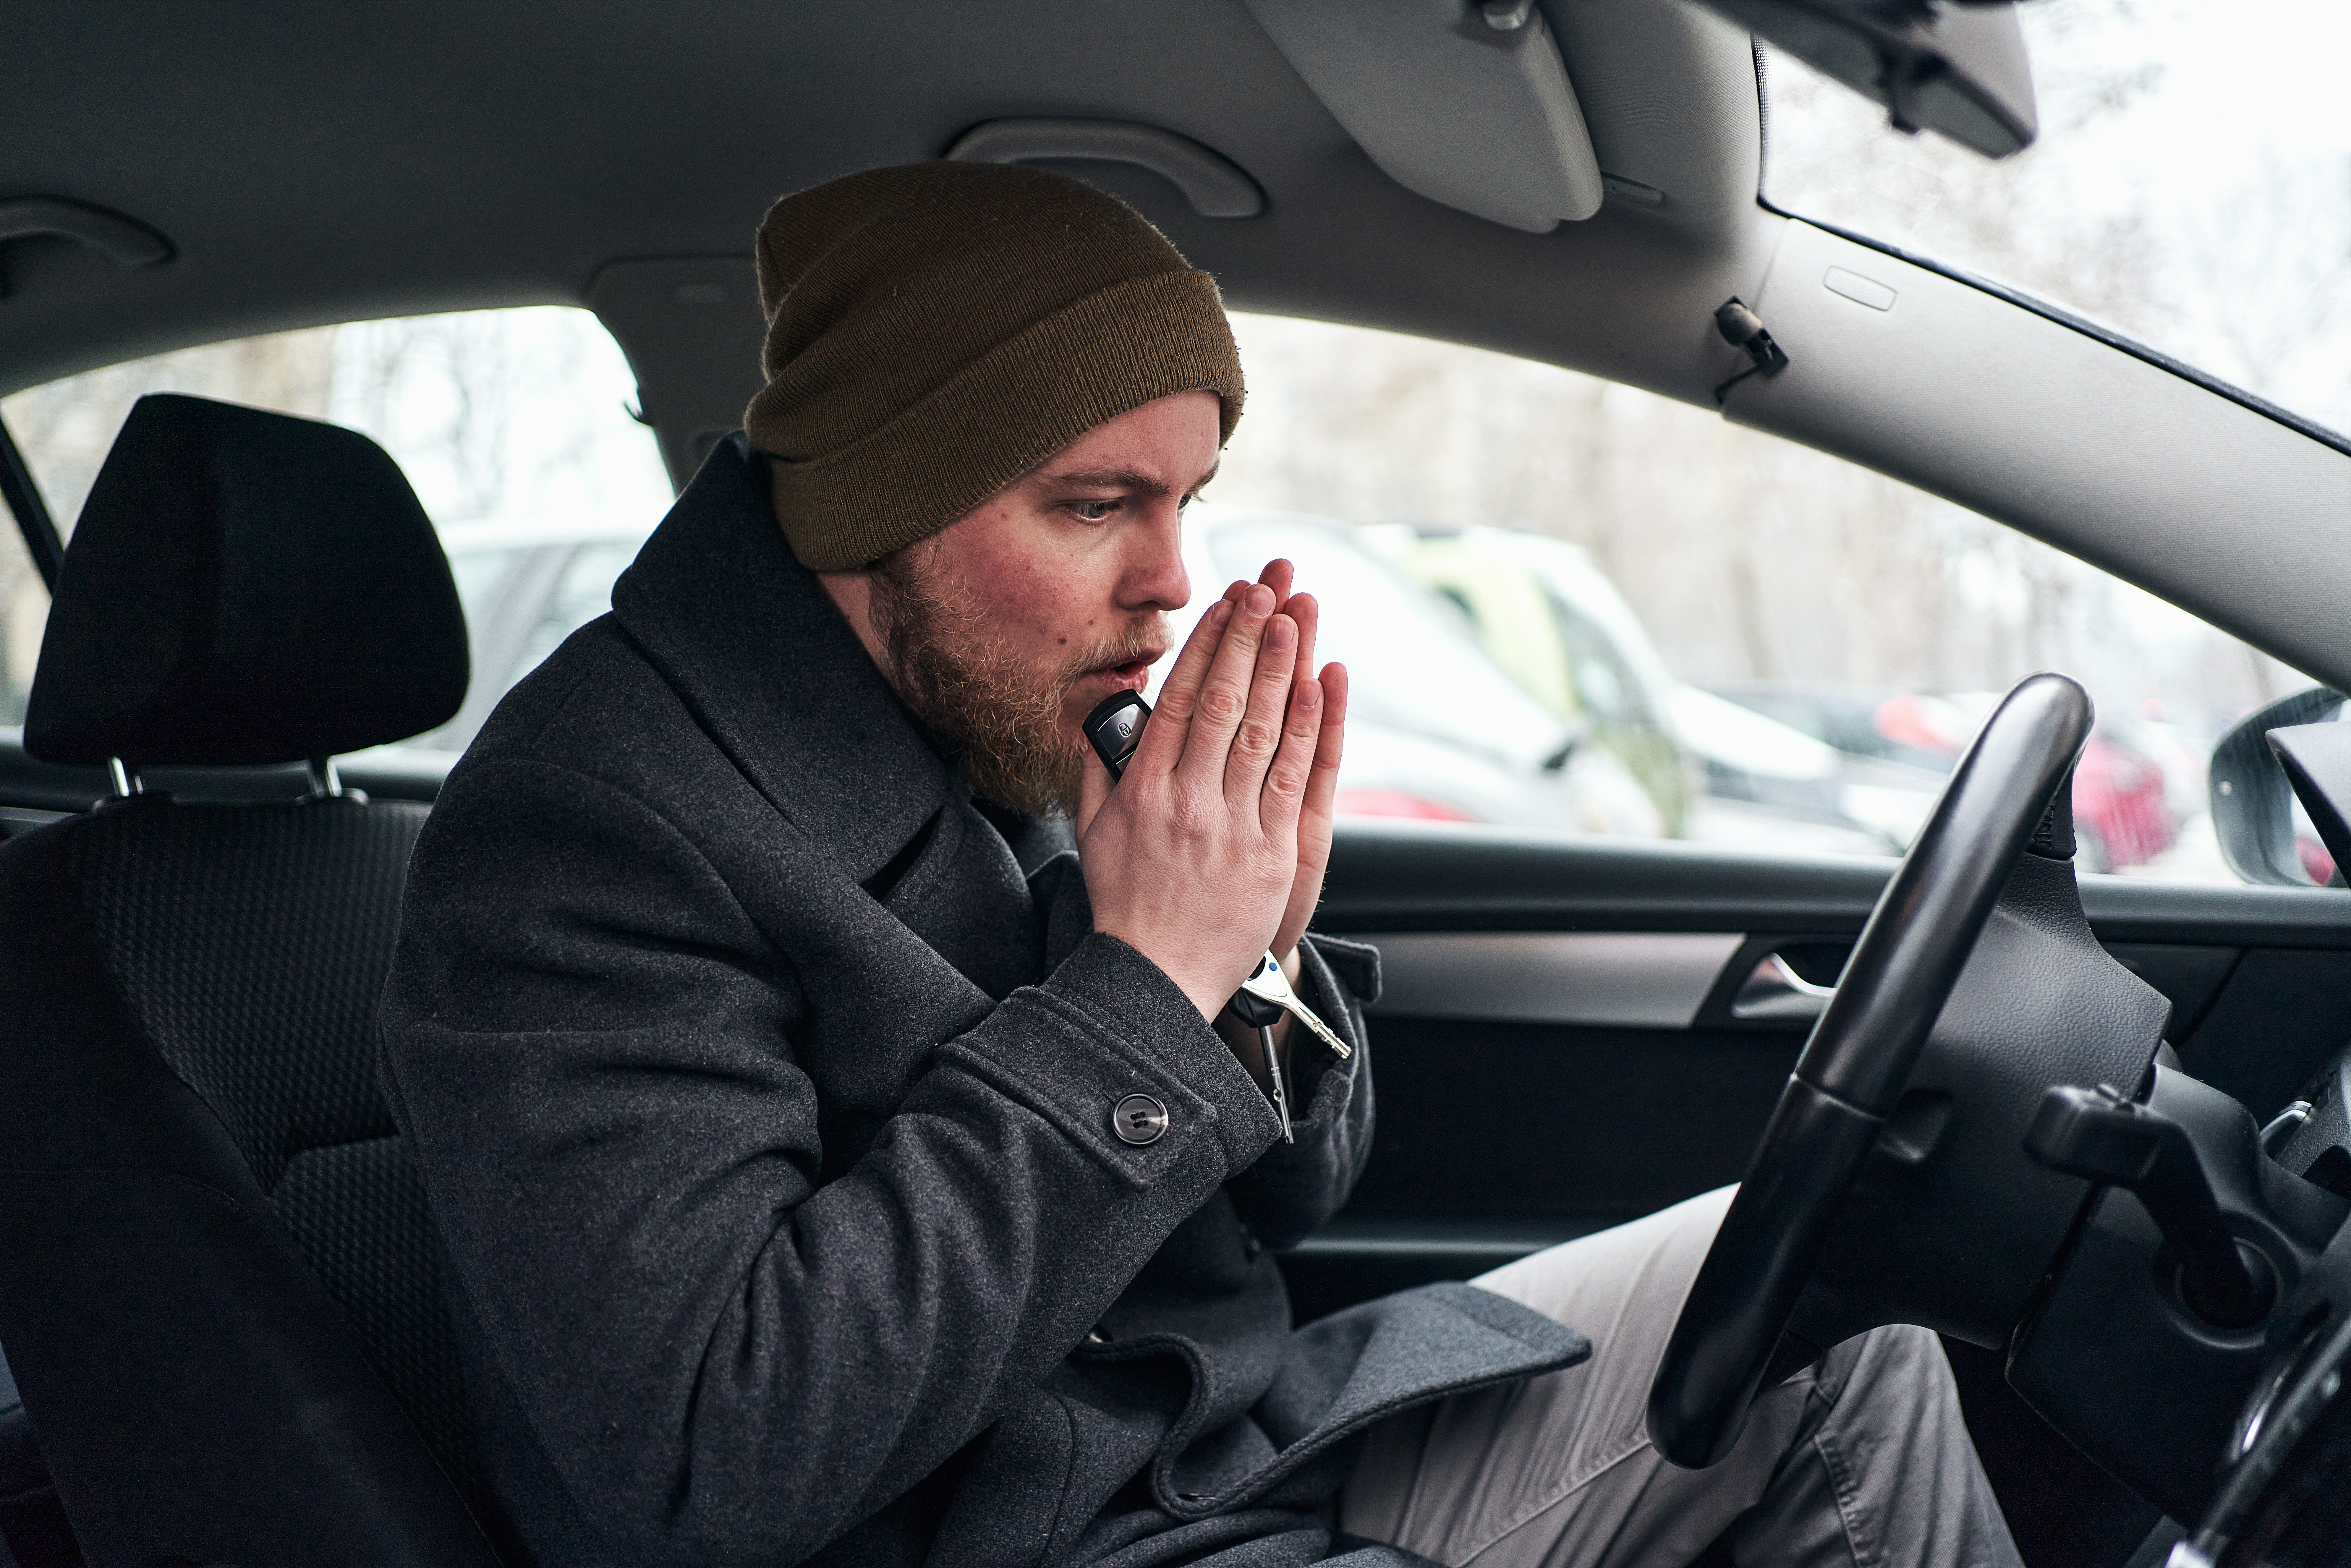 Drivers could be slapped with a hefty fine this winter if they are caught removing their coat behind the wheel